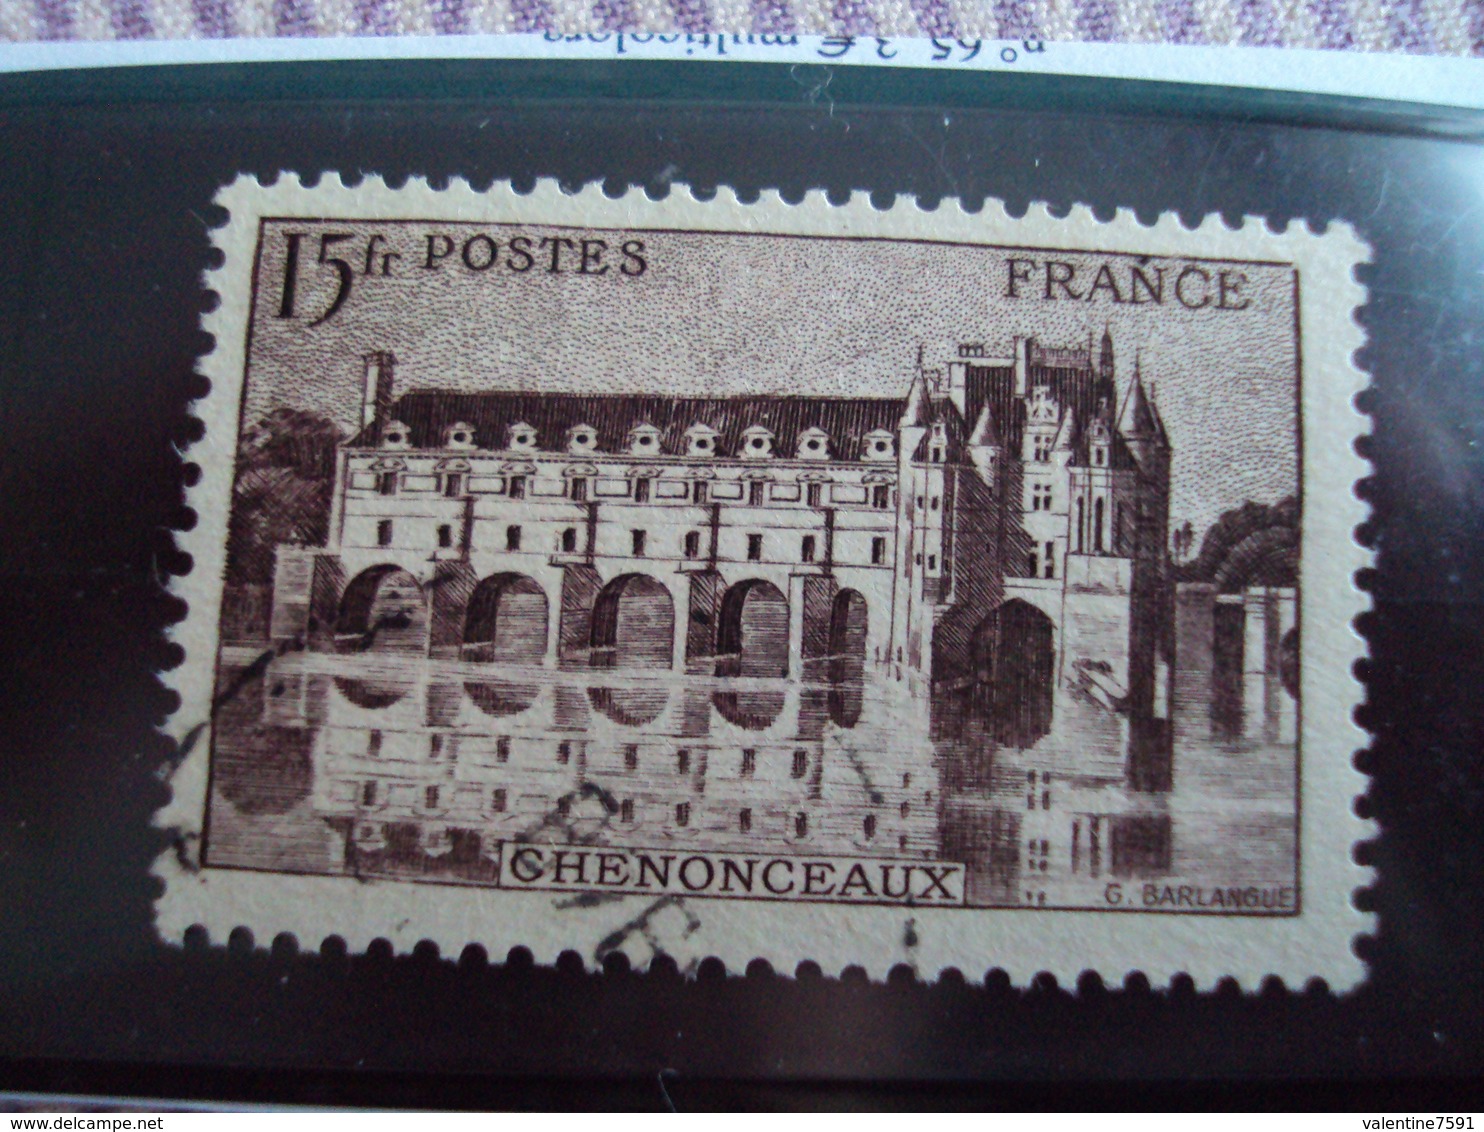 1900-1945-timbre Oblitéré N° 610  Brin Lilas-    "  Chenonceaux  15 F"     Cote  0.65      Net 0.20 - Used Stamps